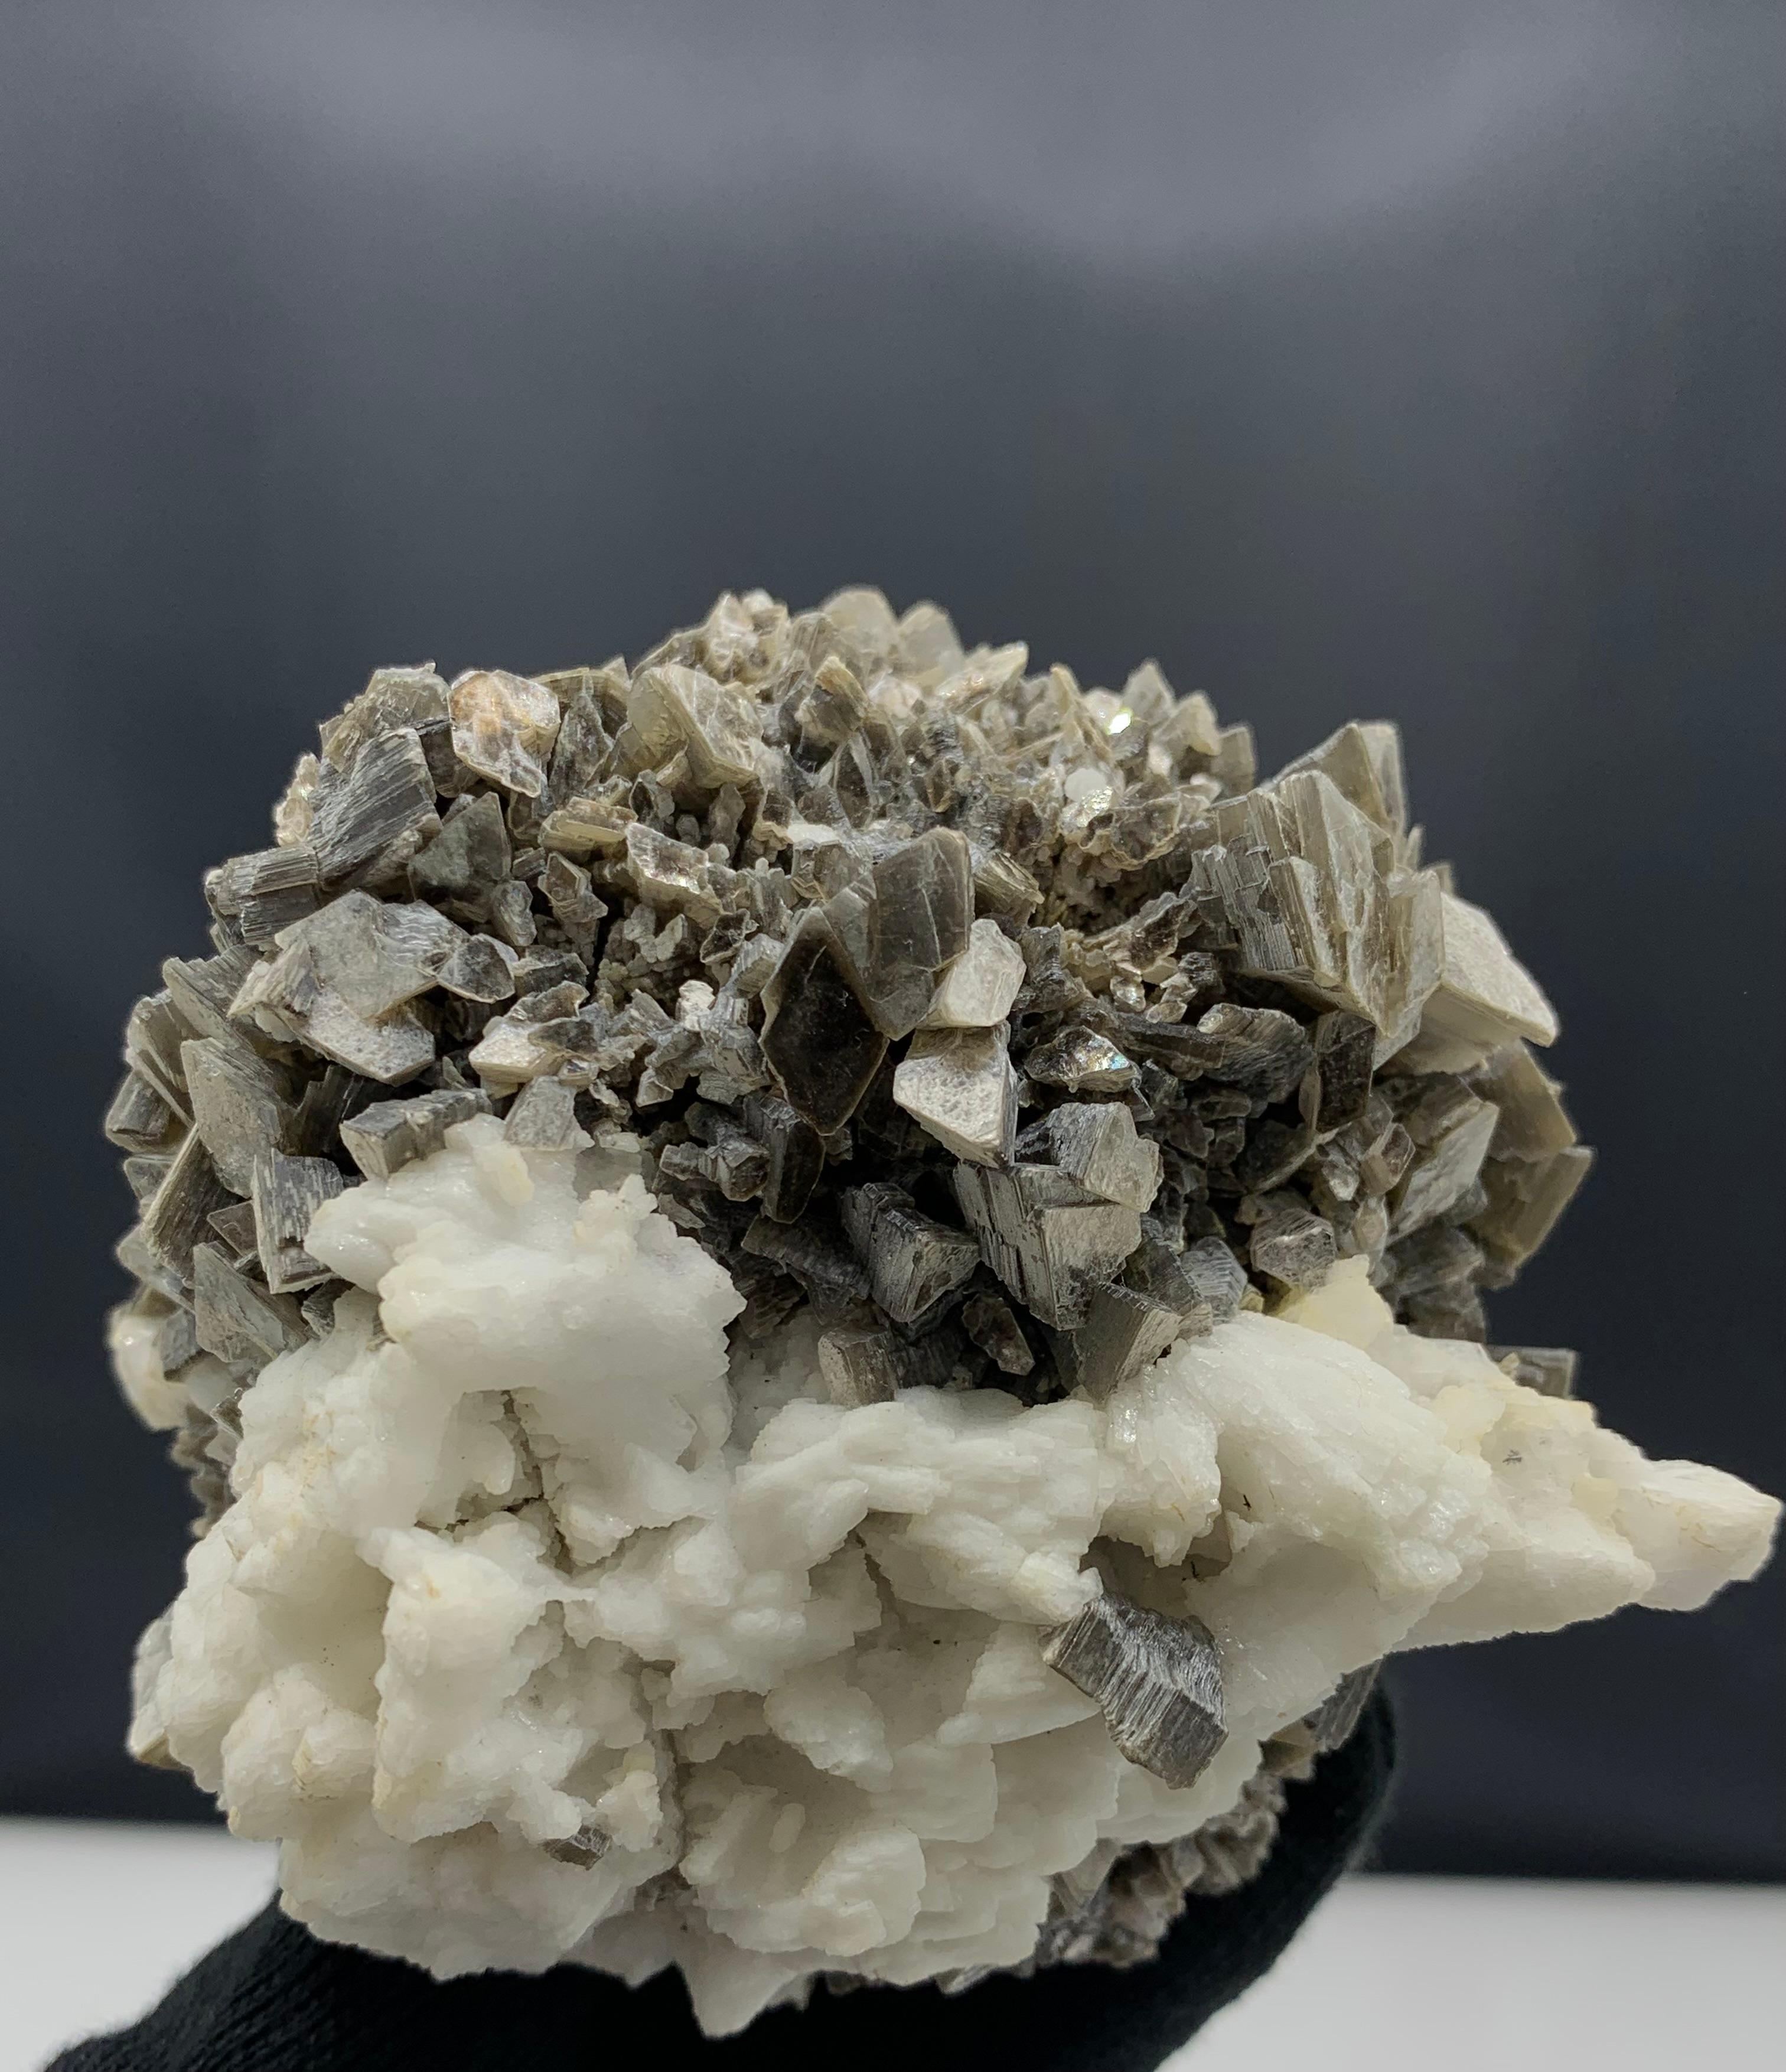 289.99 Gram Albite With Feldspar Specimen From Skardu, Pakistan 

Weight: 289.99 Gram
Dimension: 7.8 x 8.8 x 5.8 Cm
Origin: Skardu, Pakistan 

Feldspar is the name given to a group of minerals distinguished by the presence of alumina and silica